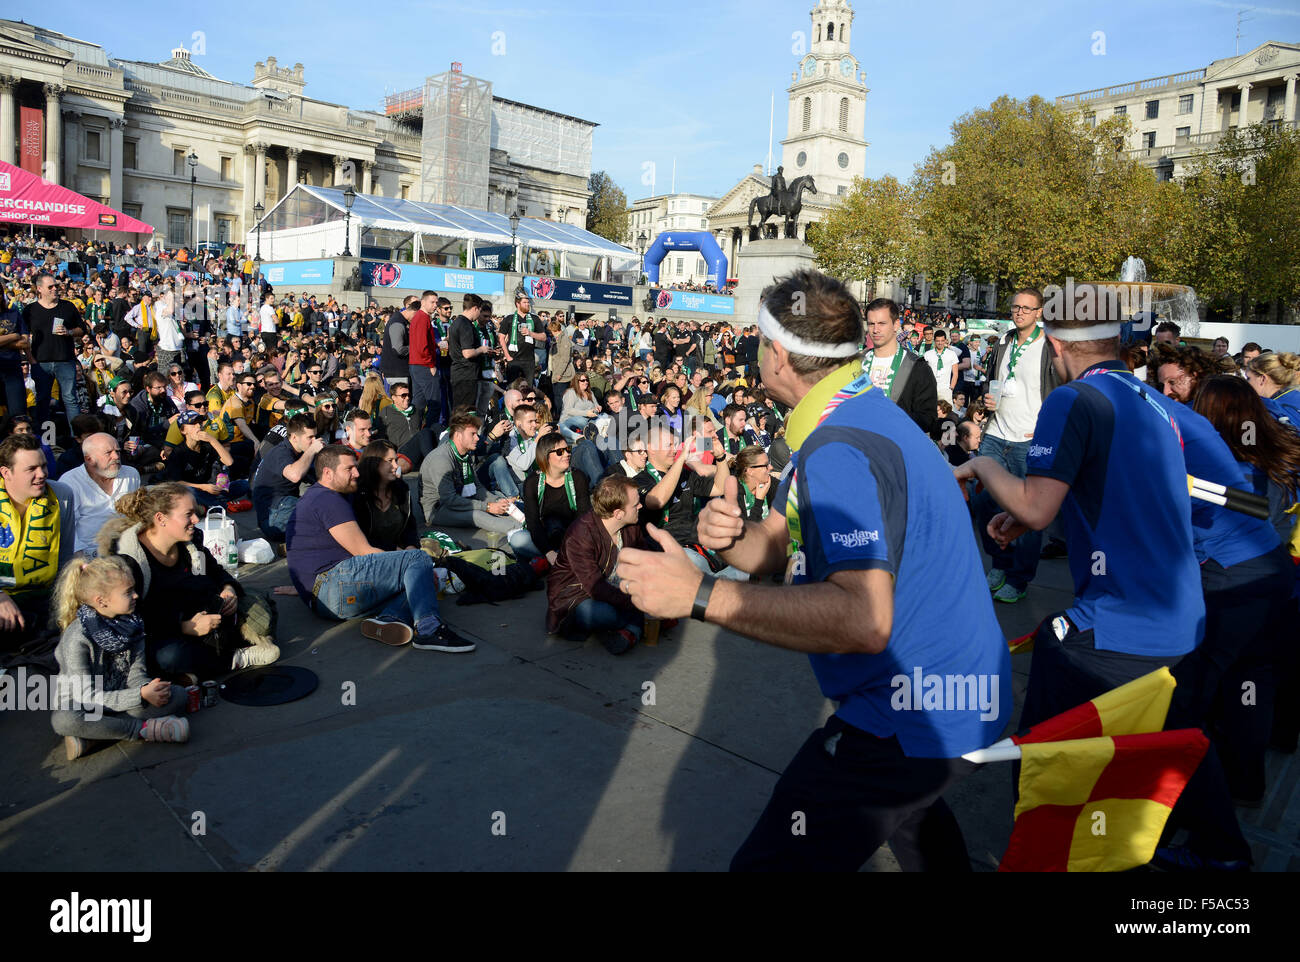 Rugby World Cup final being shown live on big screens in Trafalgar Square, London, Britain, UK Stock Photo